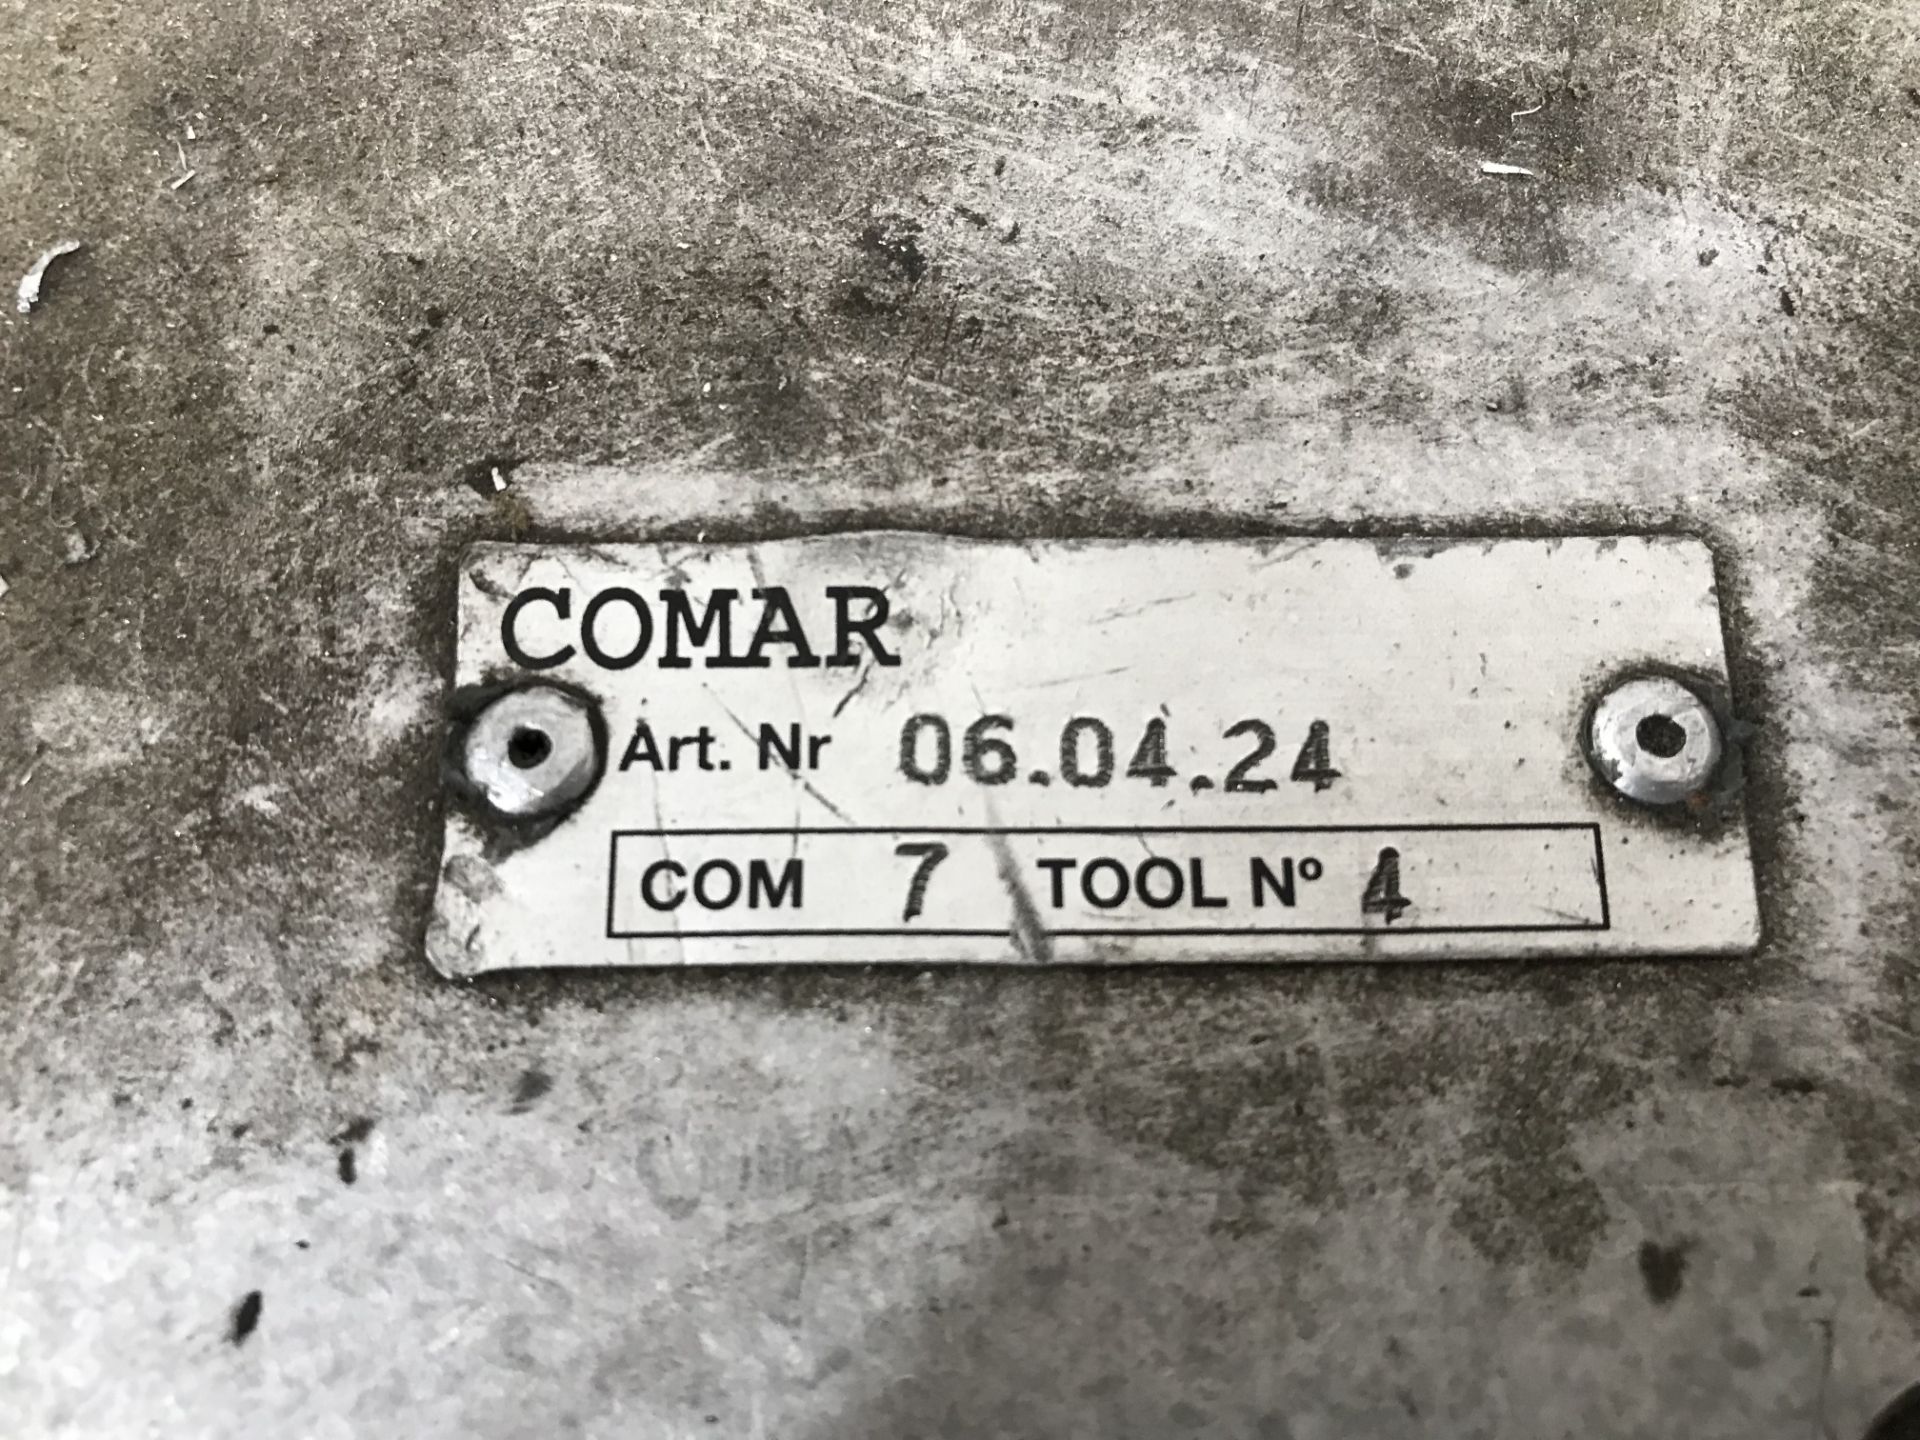 Comar Punch Tool for Door, understood to be COM7 Tool 1, no. 1A1C150 29907, with Comar Punch Tool - Image 4 of 4